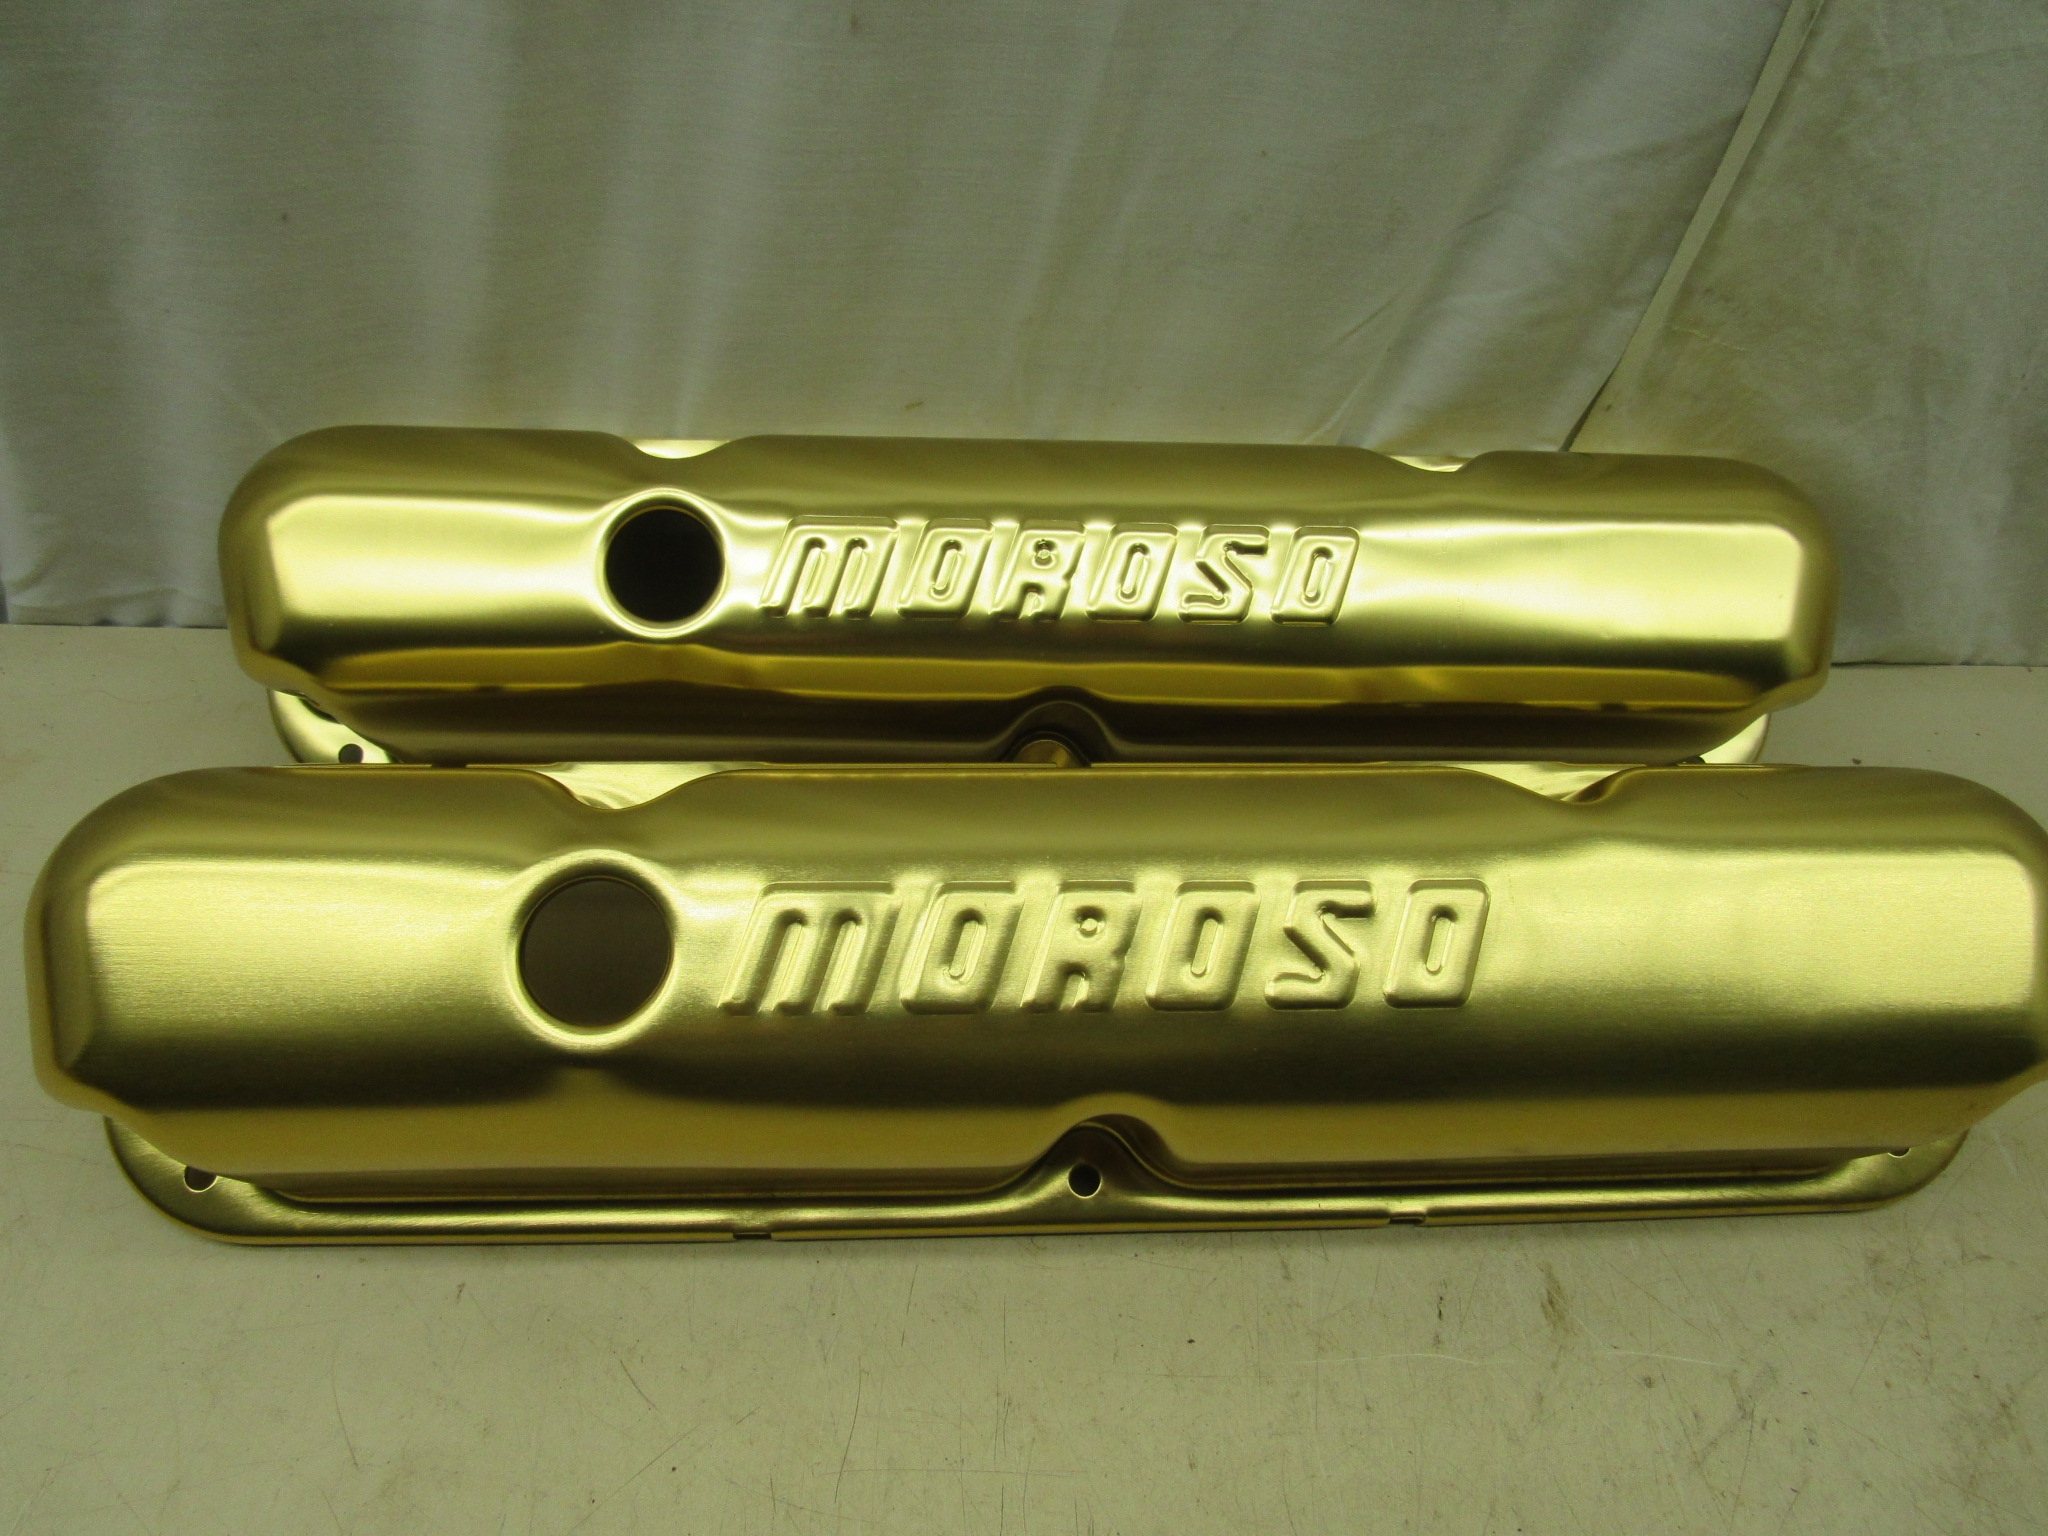 50％OFF】 新品 Moroso 68310 Fabricated Aluminum Valve Covers, Fits Small Block  Mopar Chrysler Engines w Non Magnum Heads